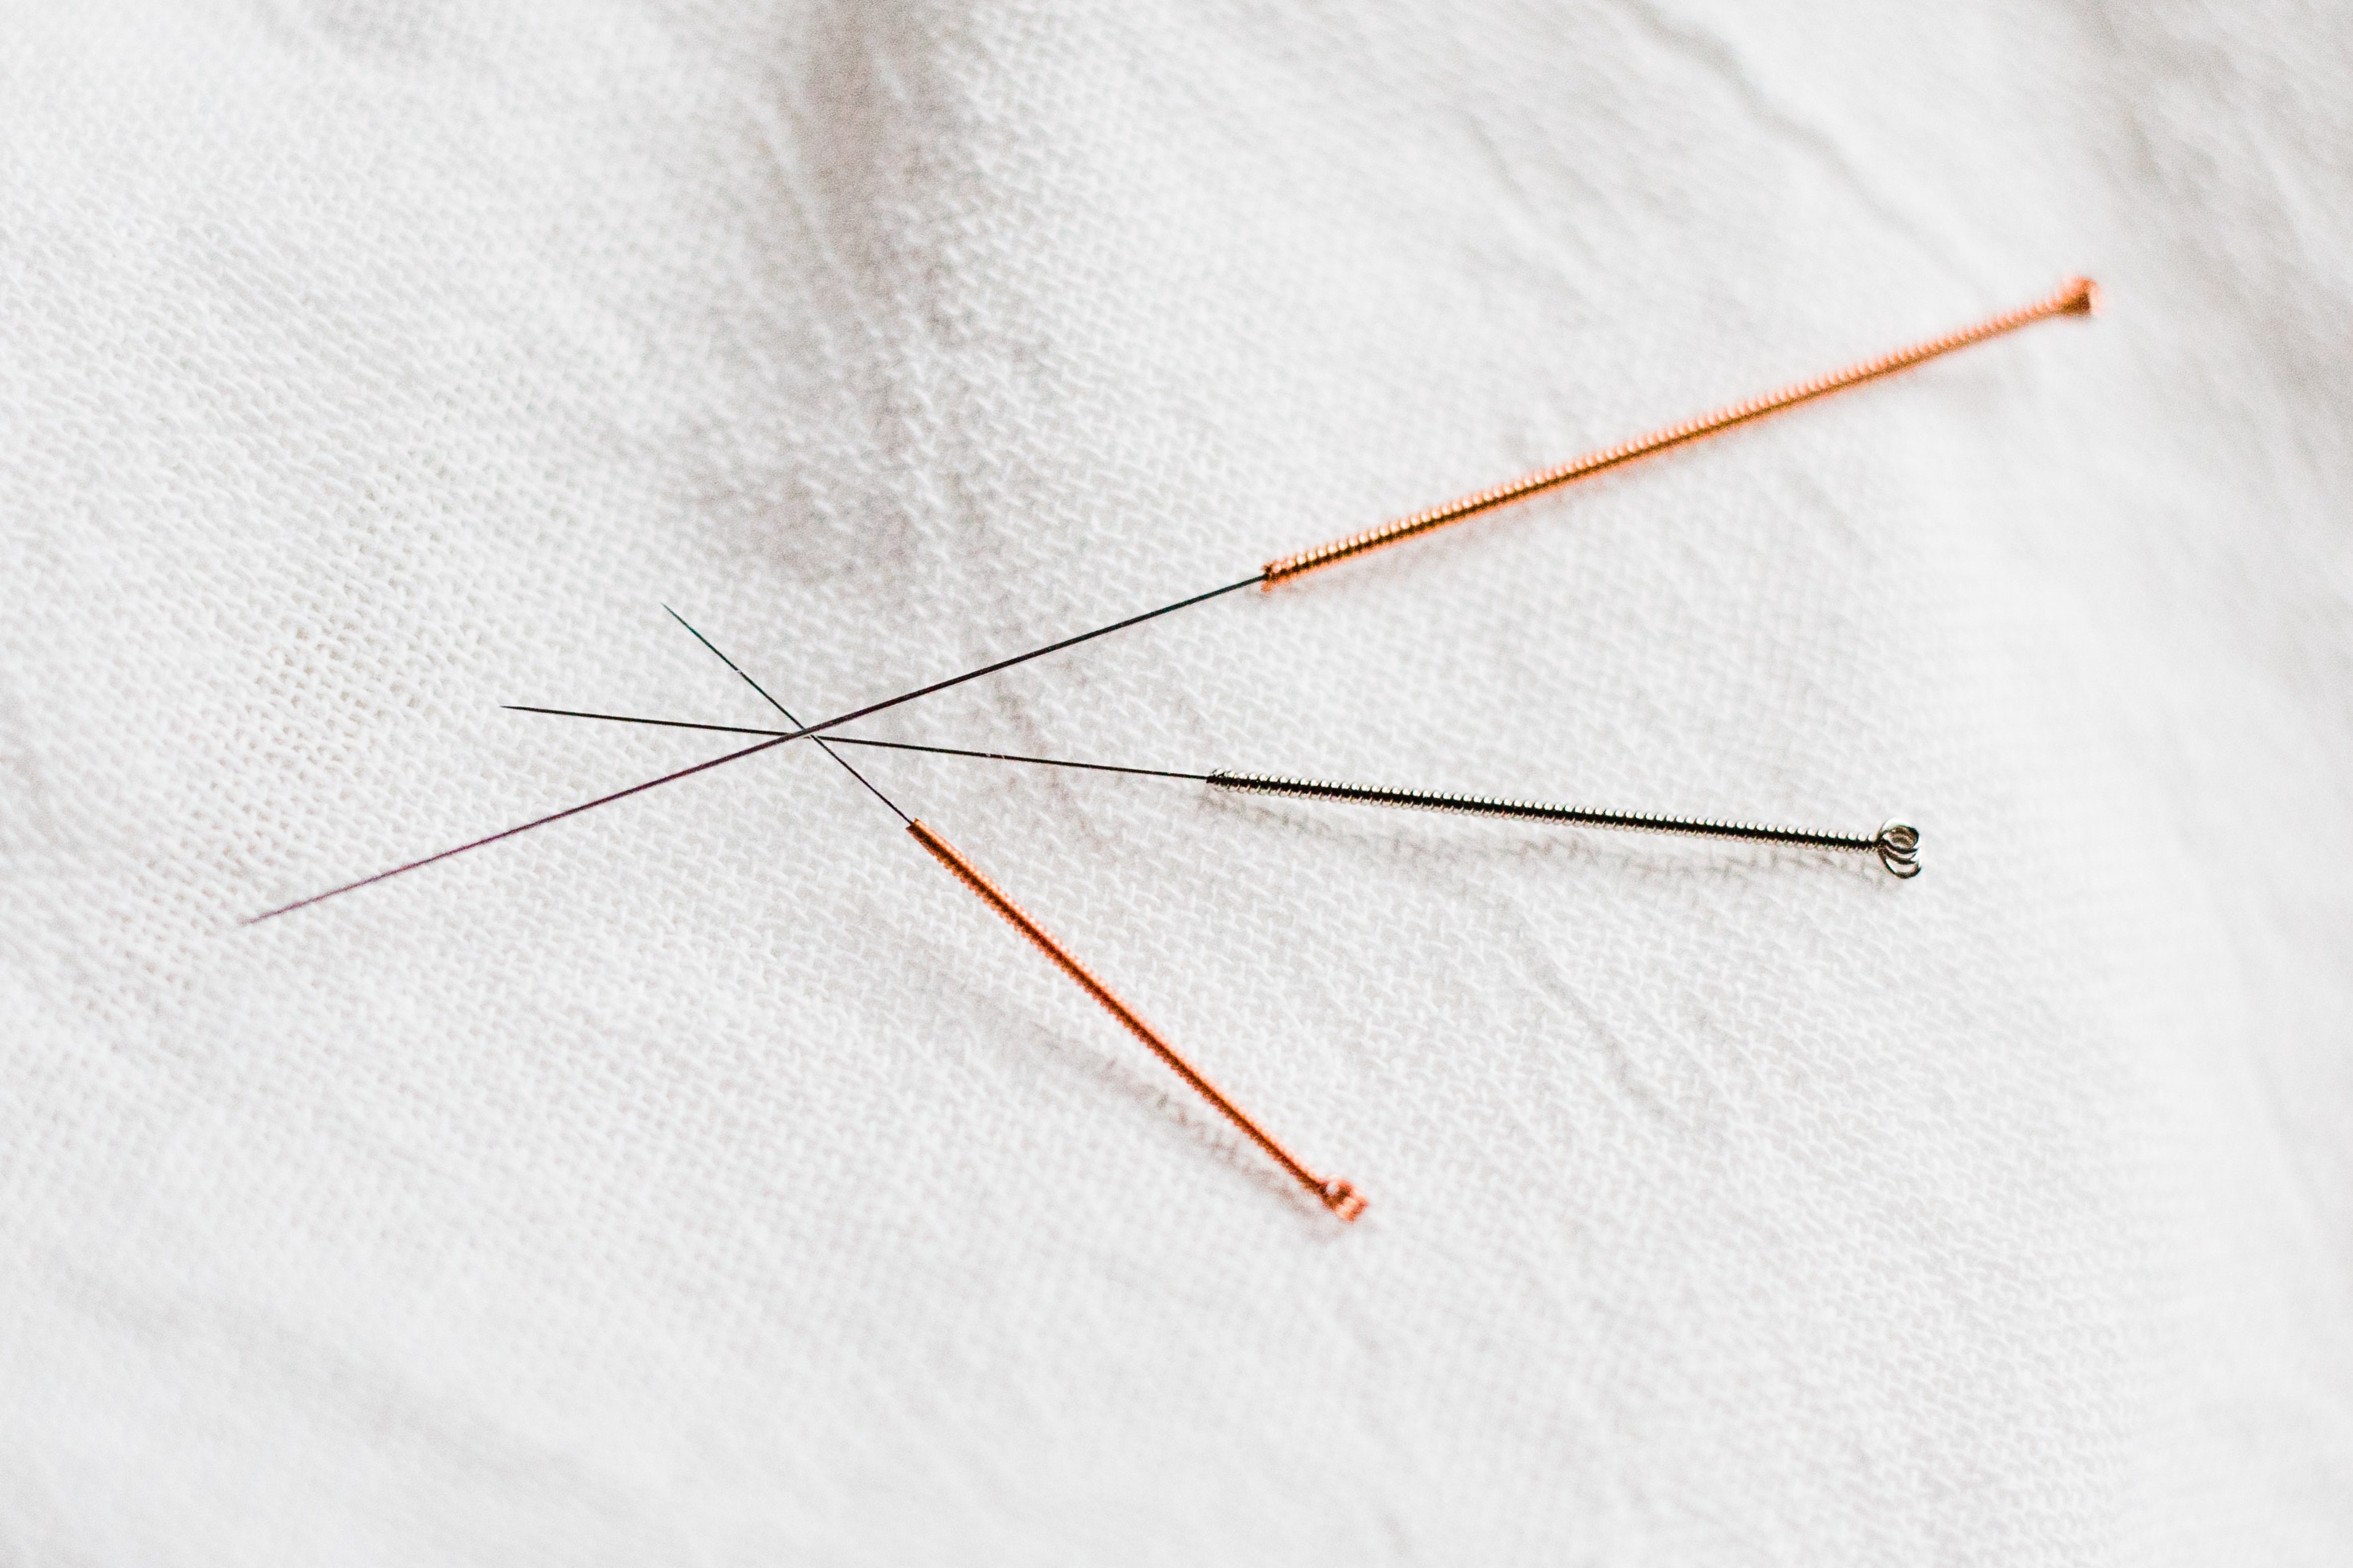 Acupuncture Needles Used at ARC Acupuncture,